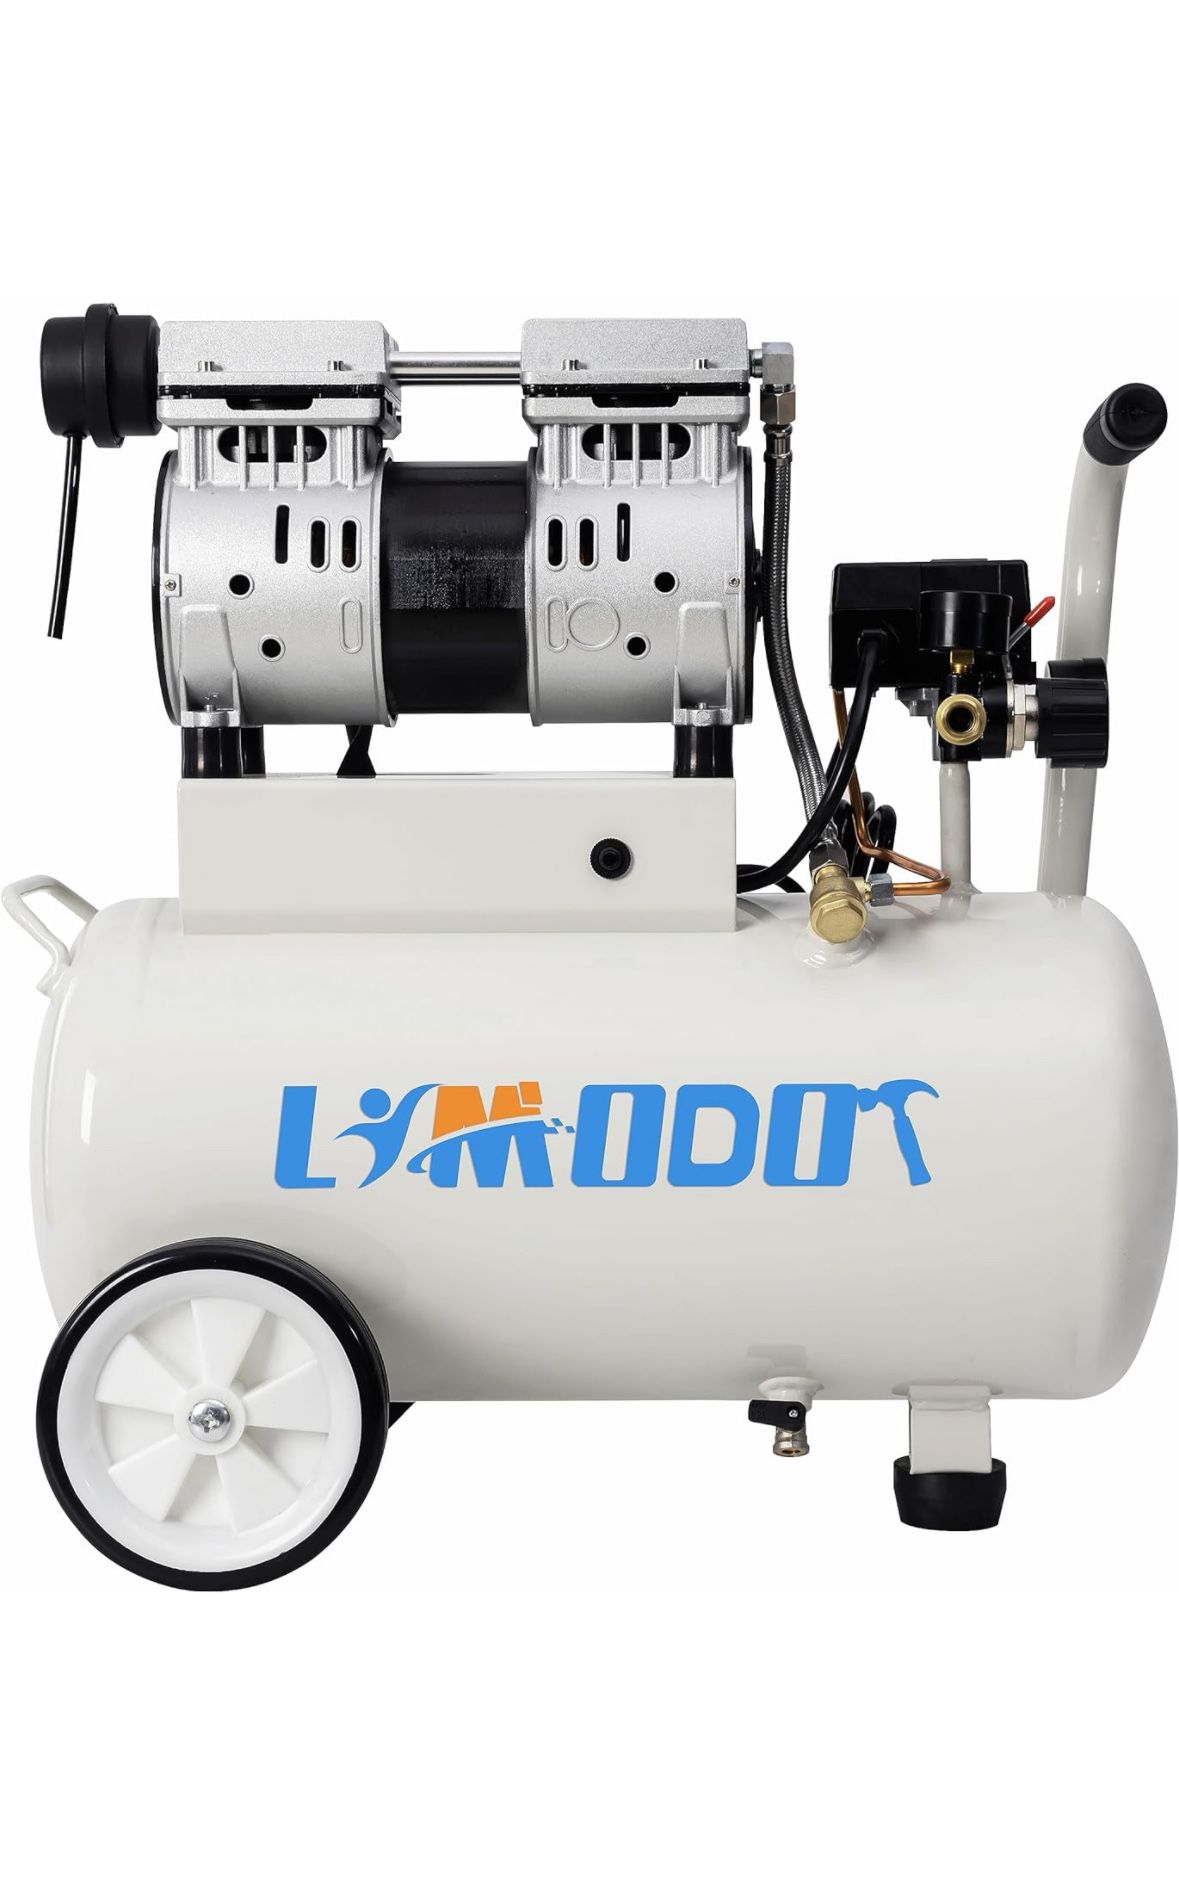 Limodot Air Compressor, Ultra Quiet Air Compressor, Only 68dB, 6 Gallon Durable Steel Air Tank, Fill In 80s, Fast 25s Recovery, Oil-Free, Ideal For Sh